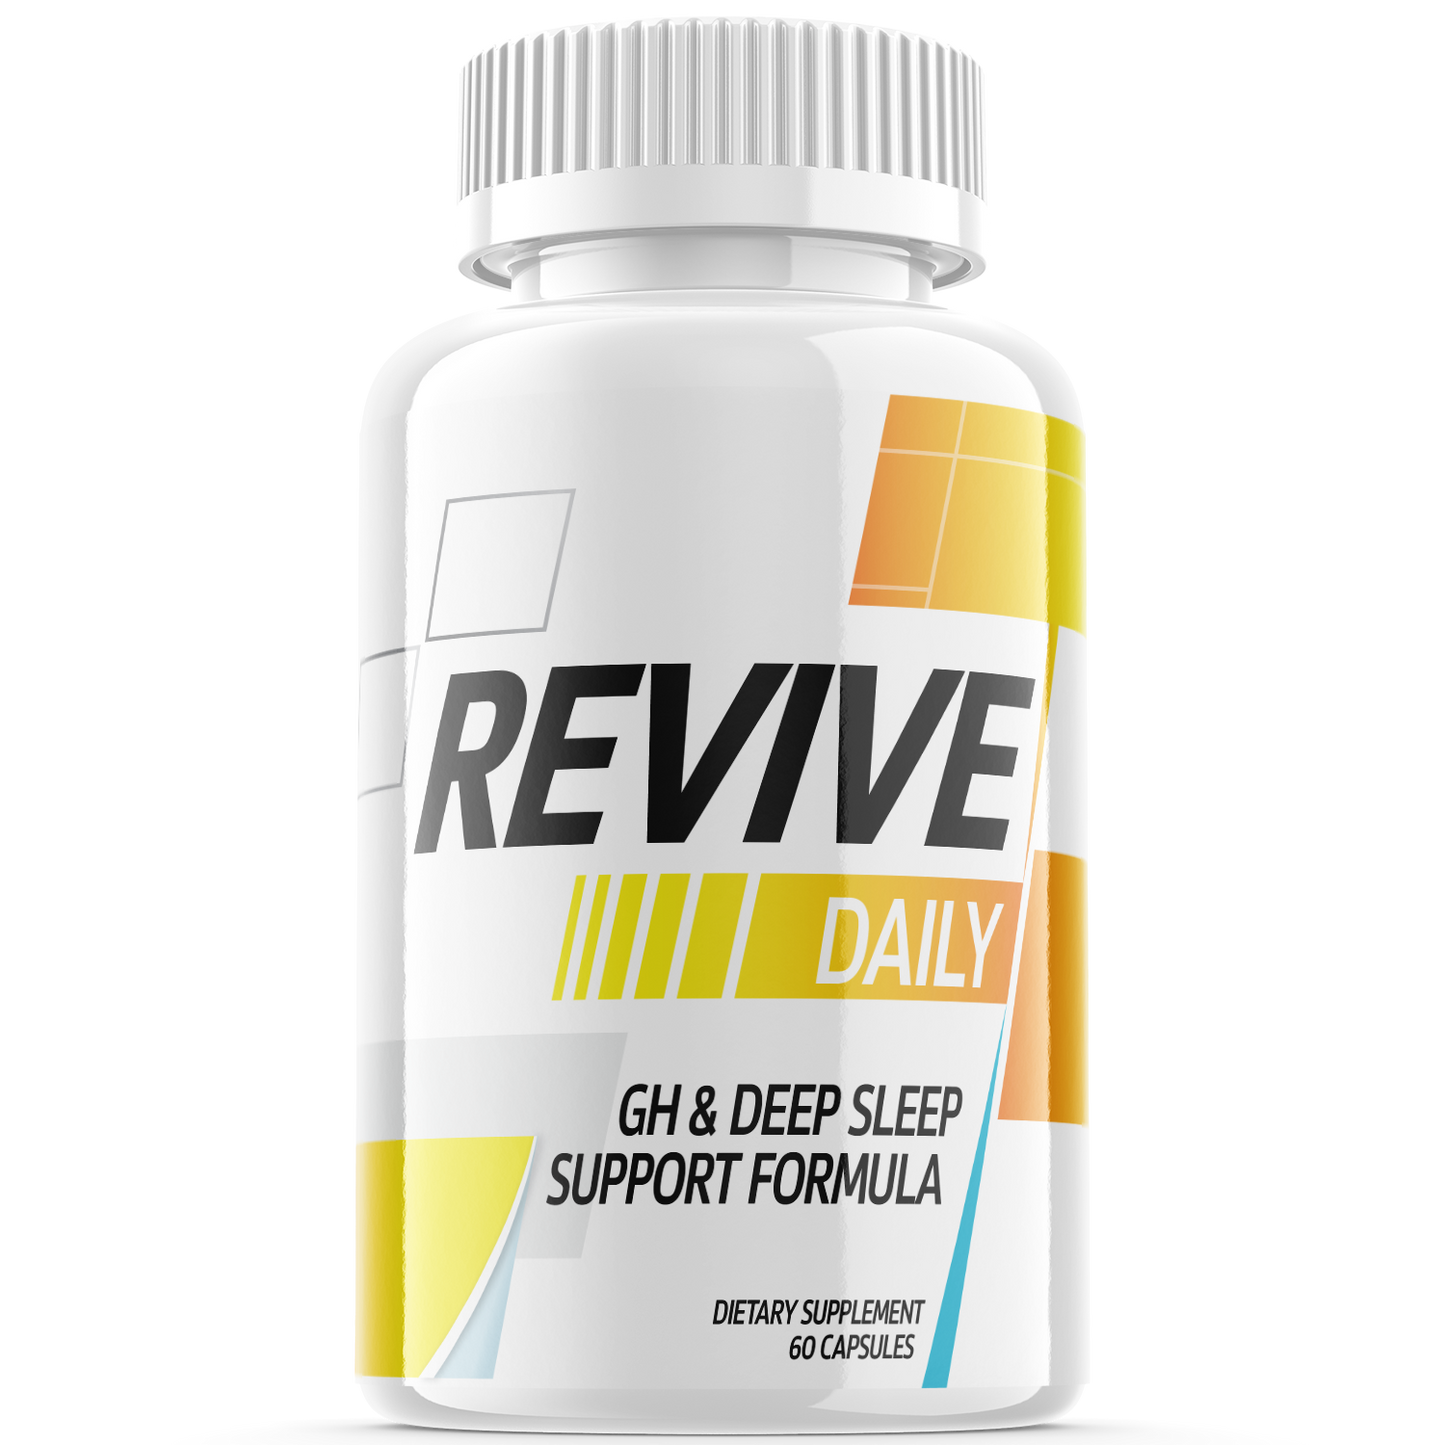 Revive Daily Pills